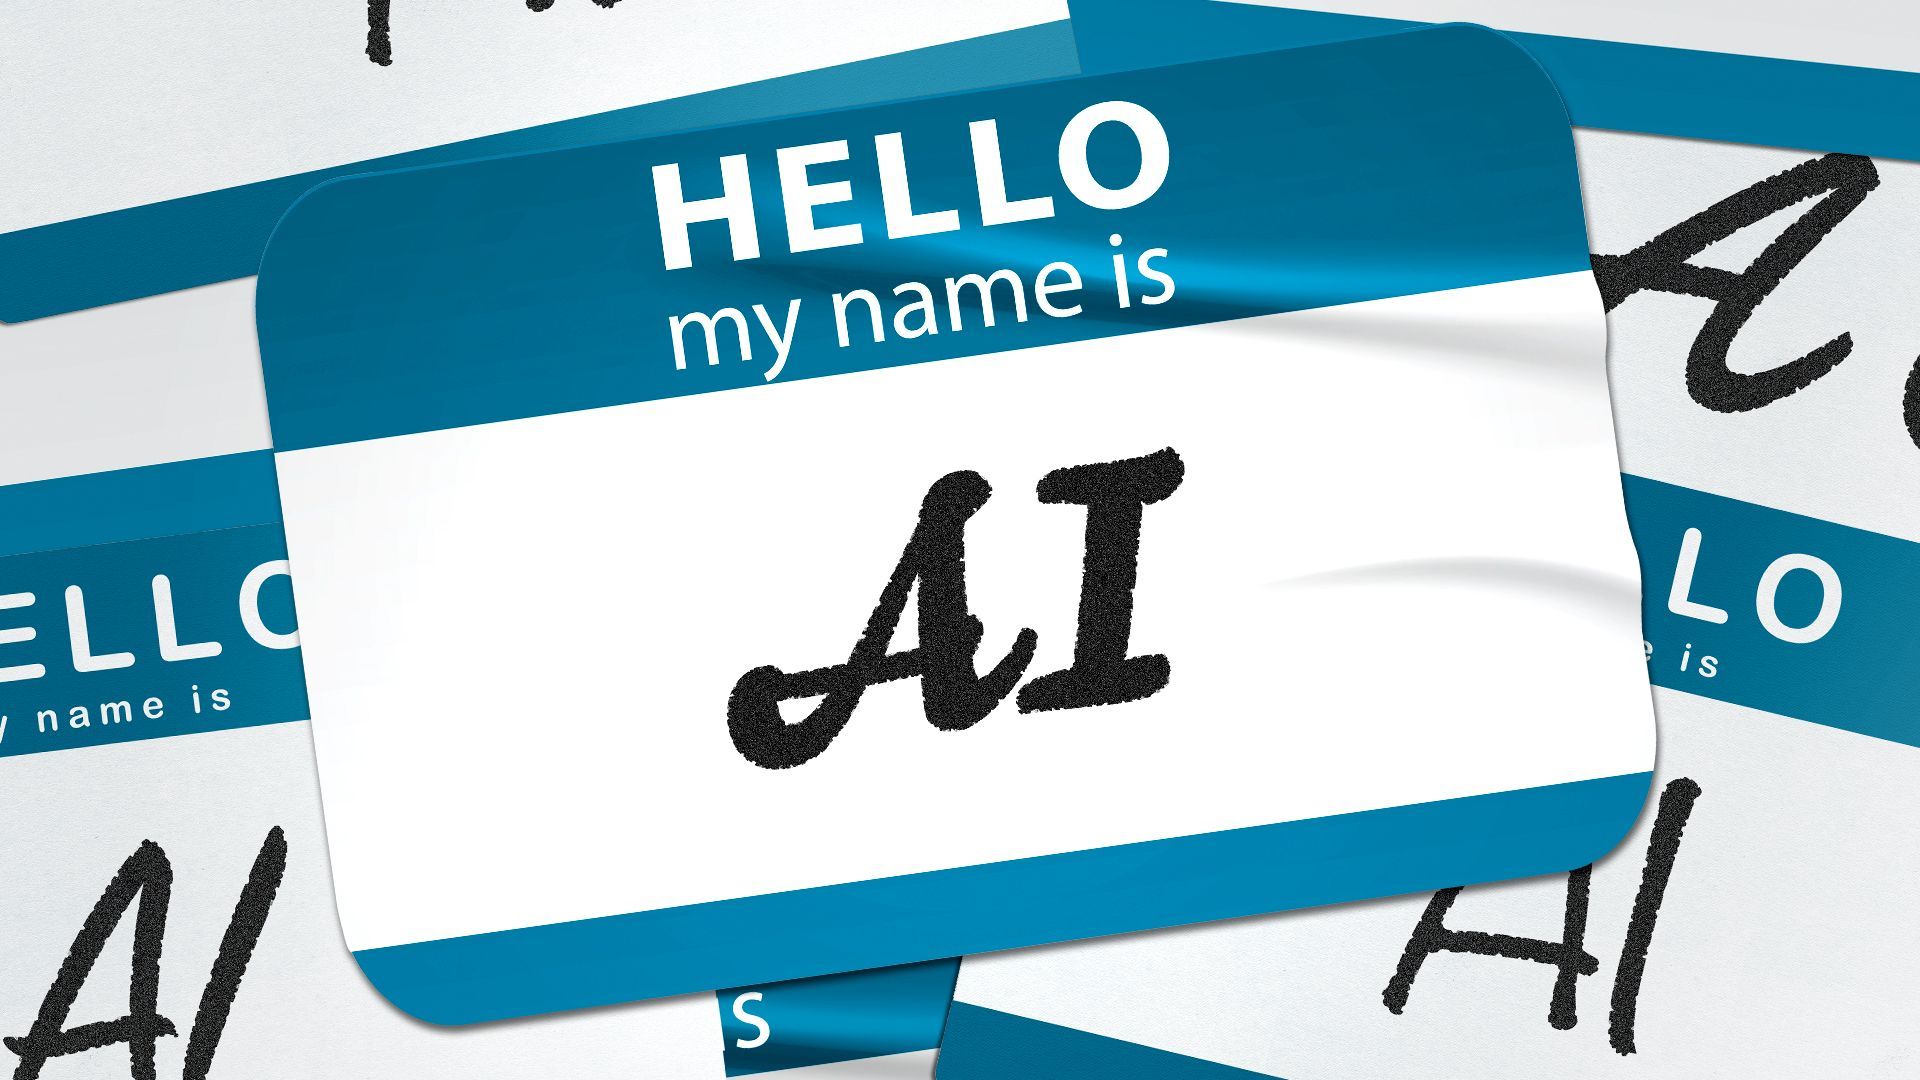 Illustration of multiple name tags that all say "Hello my name is AI."